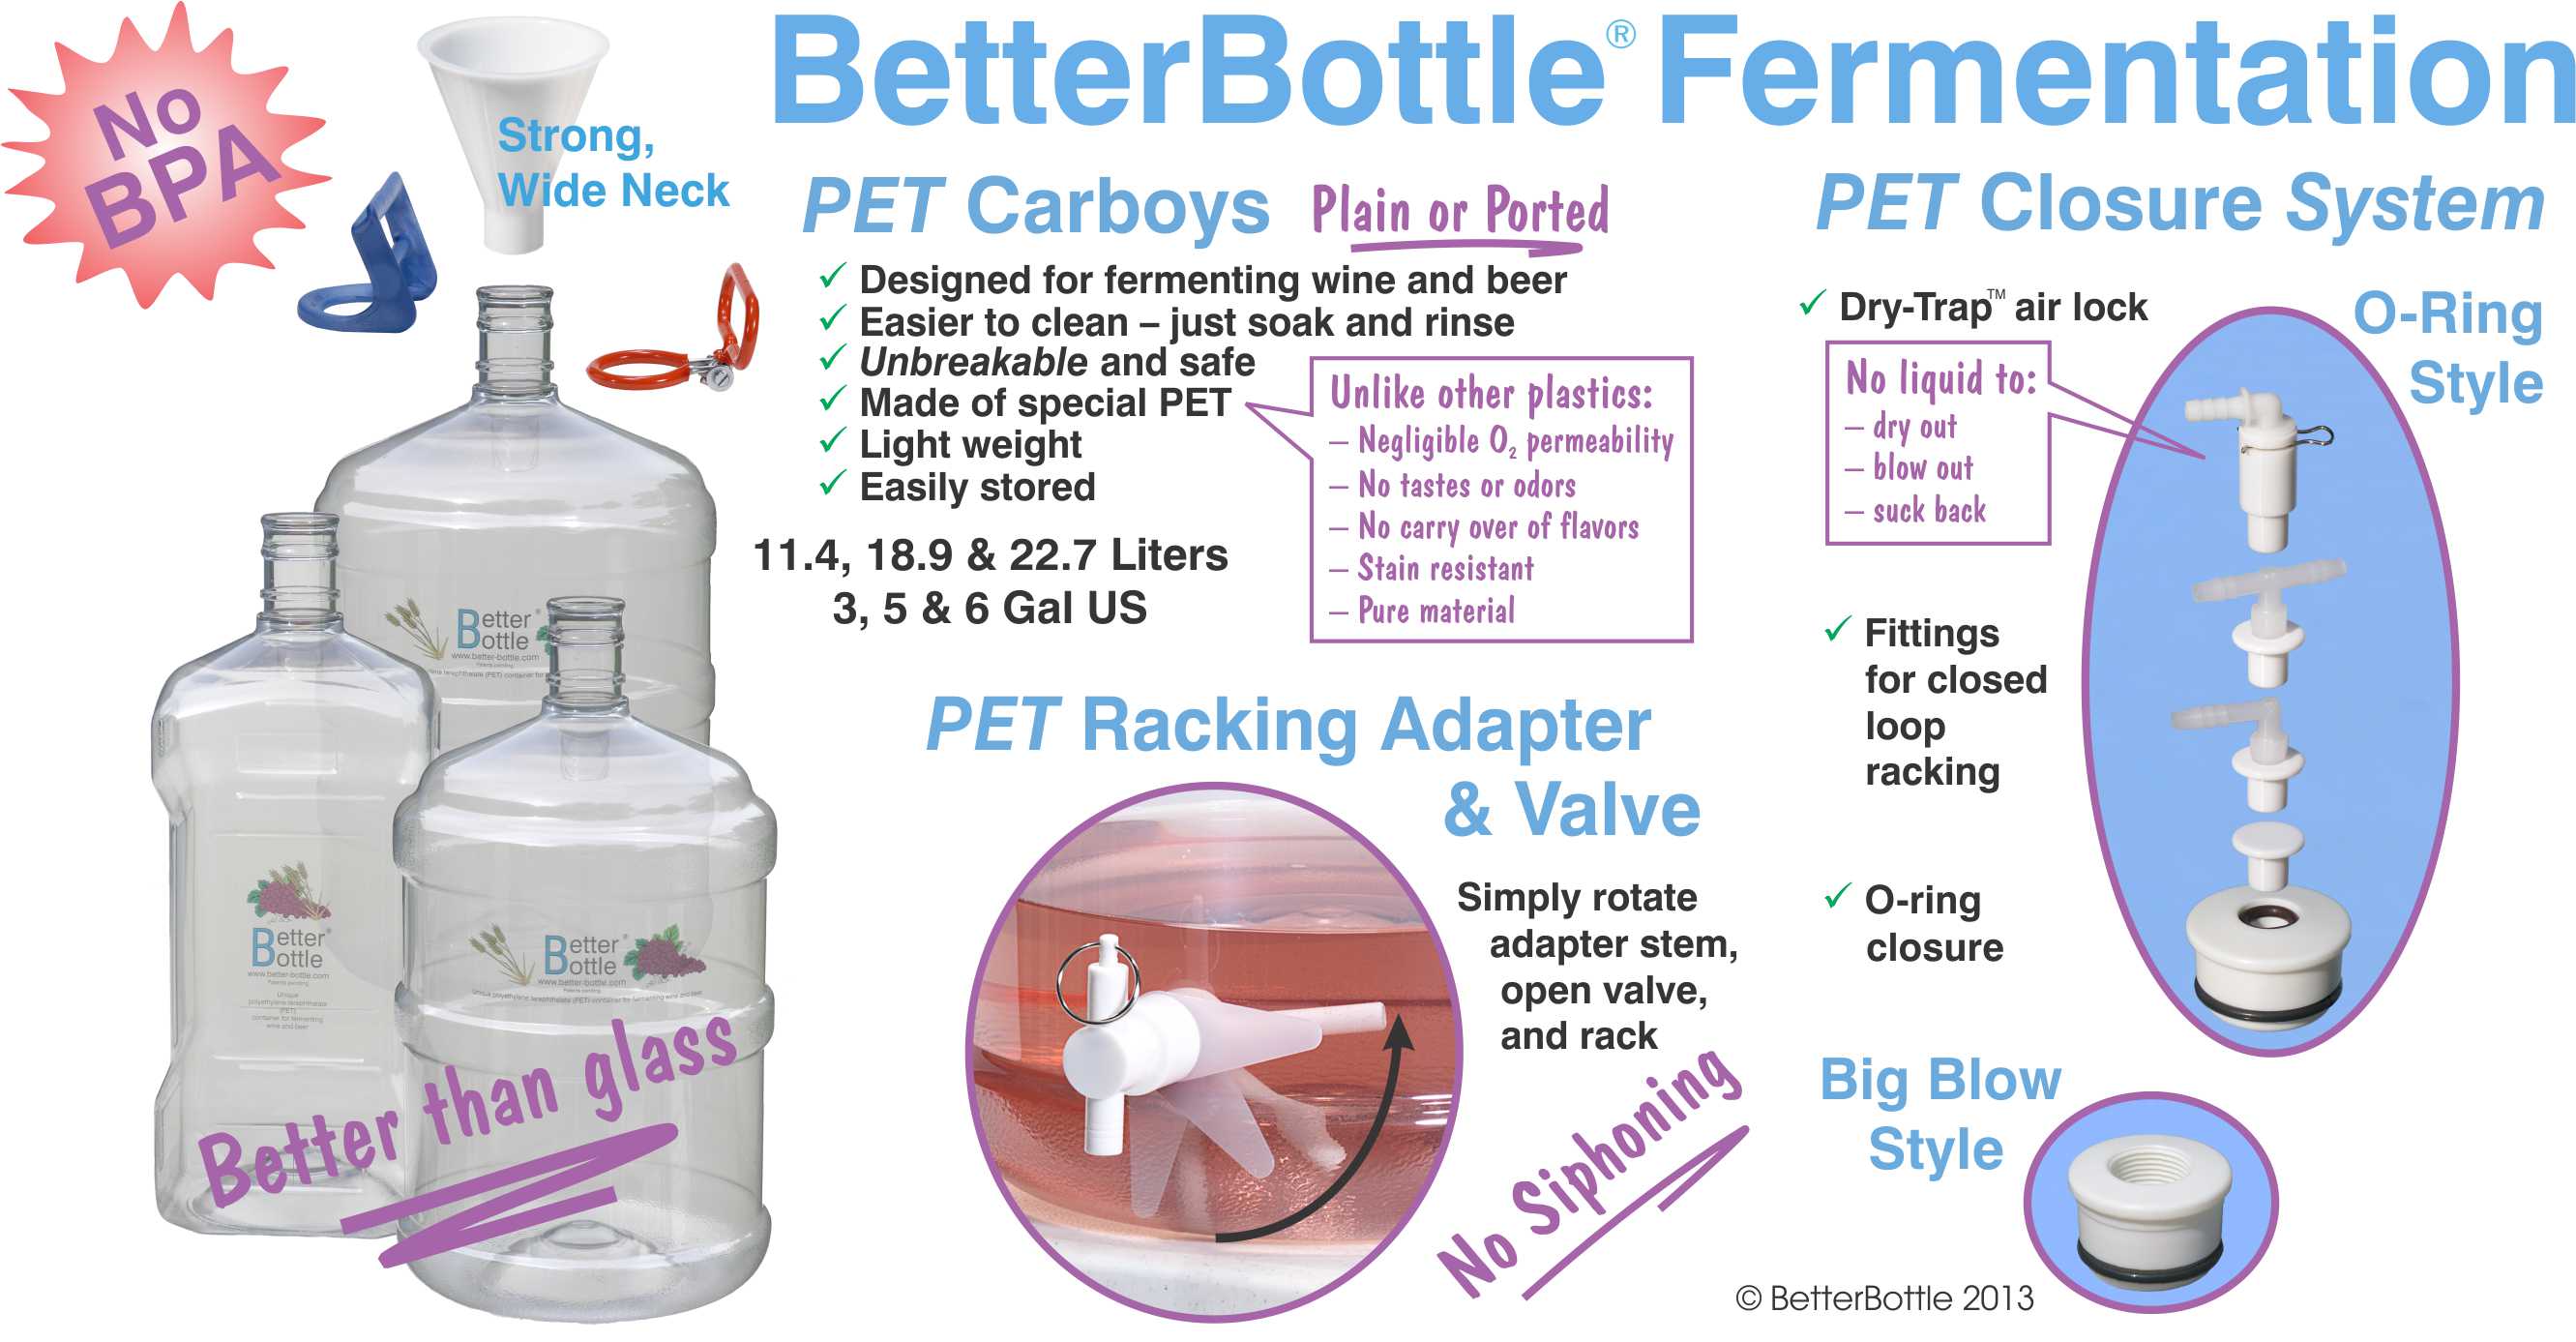 Better-Bottle PET carboys for home winemaking and home brewing